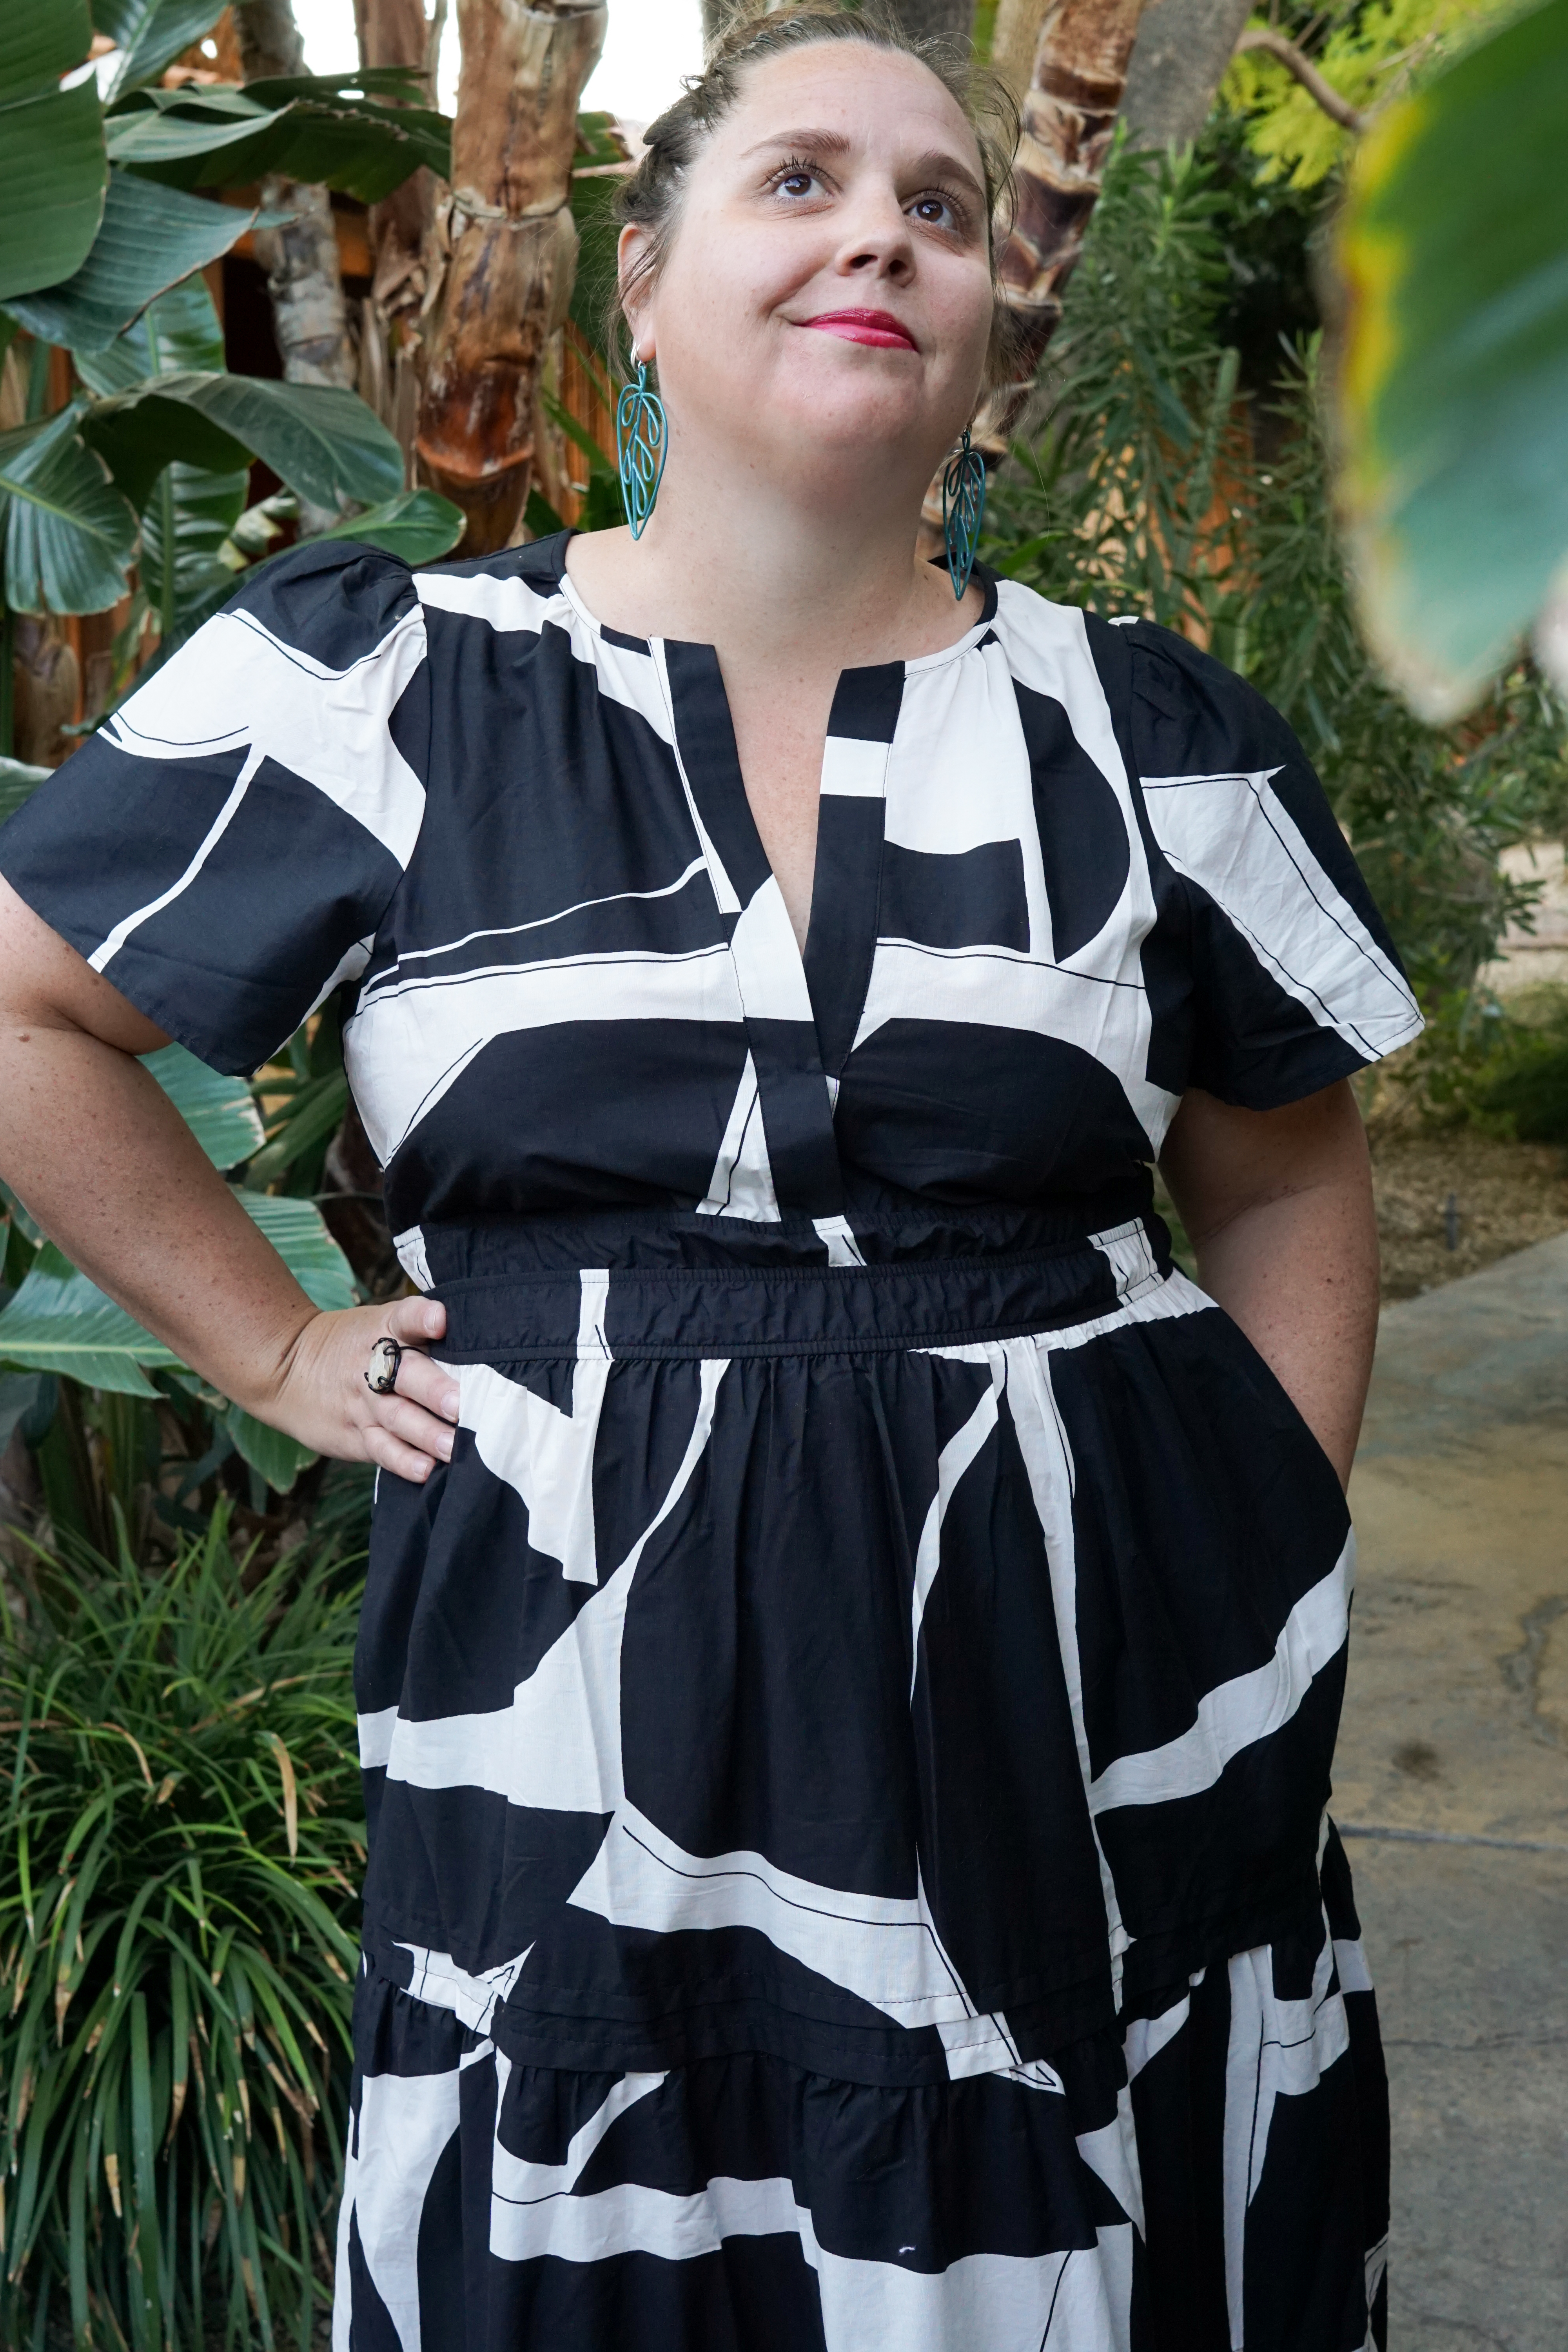 woman wearing black and white dress and statement earrings in a garden in palm springs, california